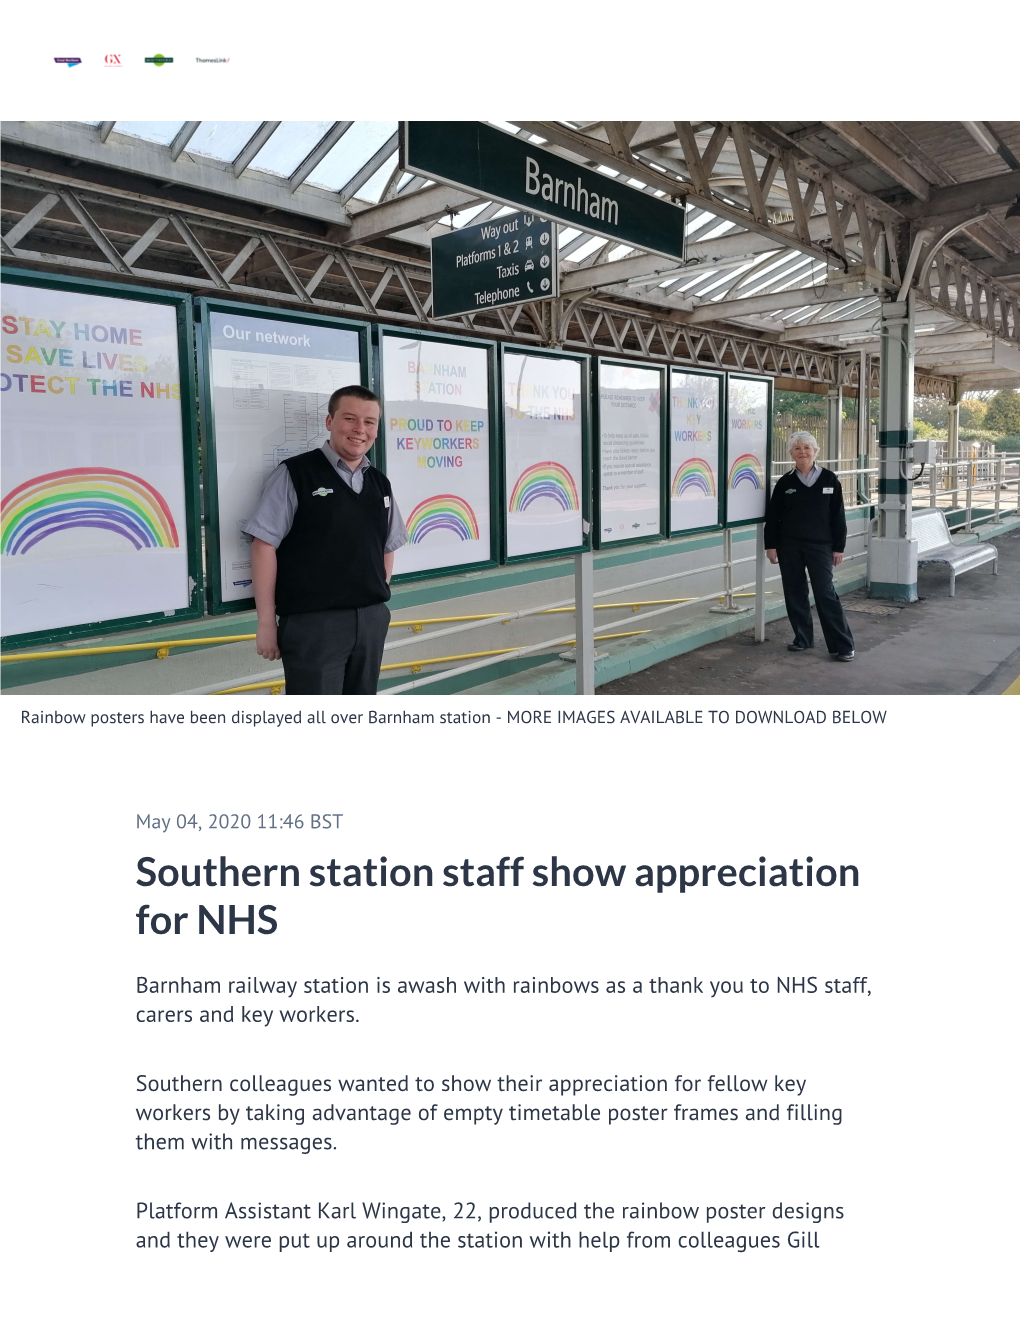 Southern Station Staff Show Appreciation for NHS